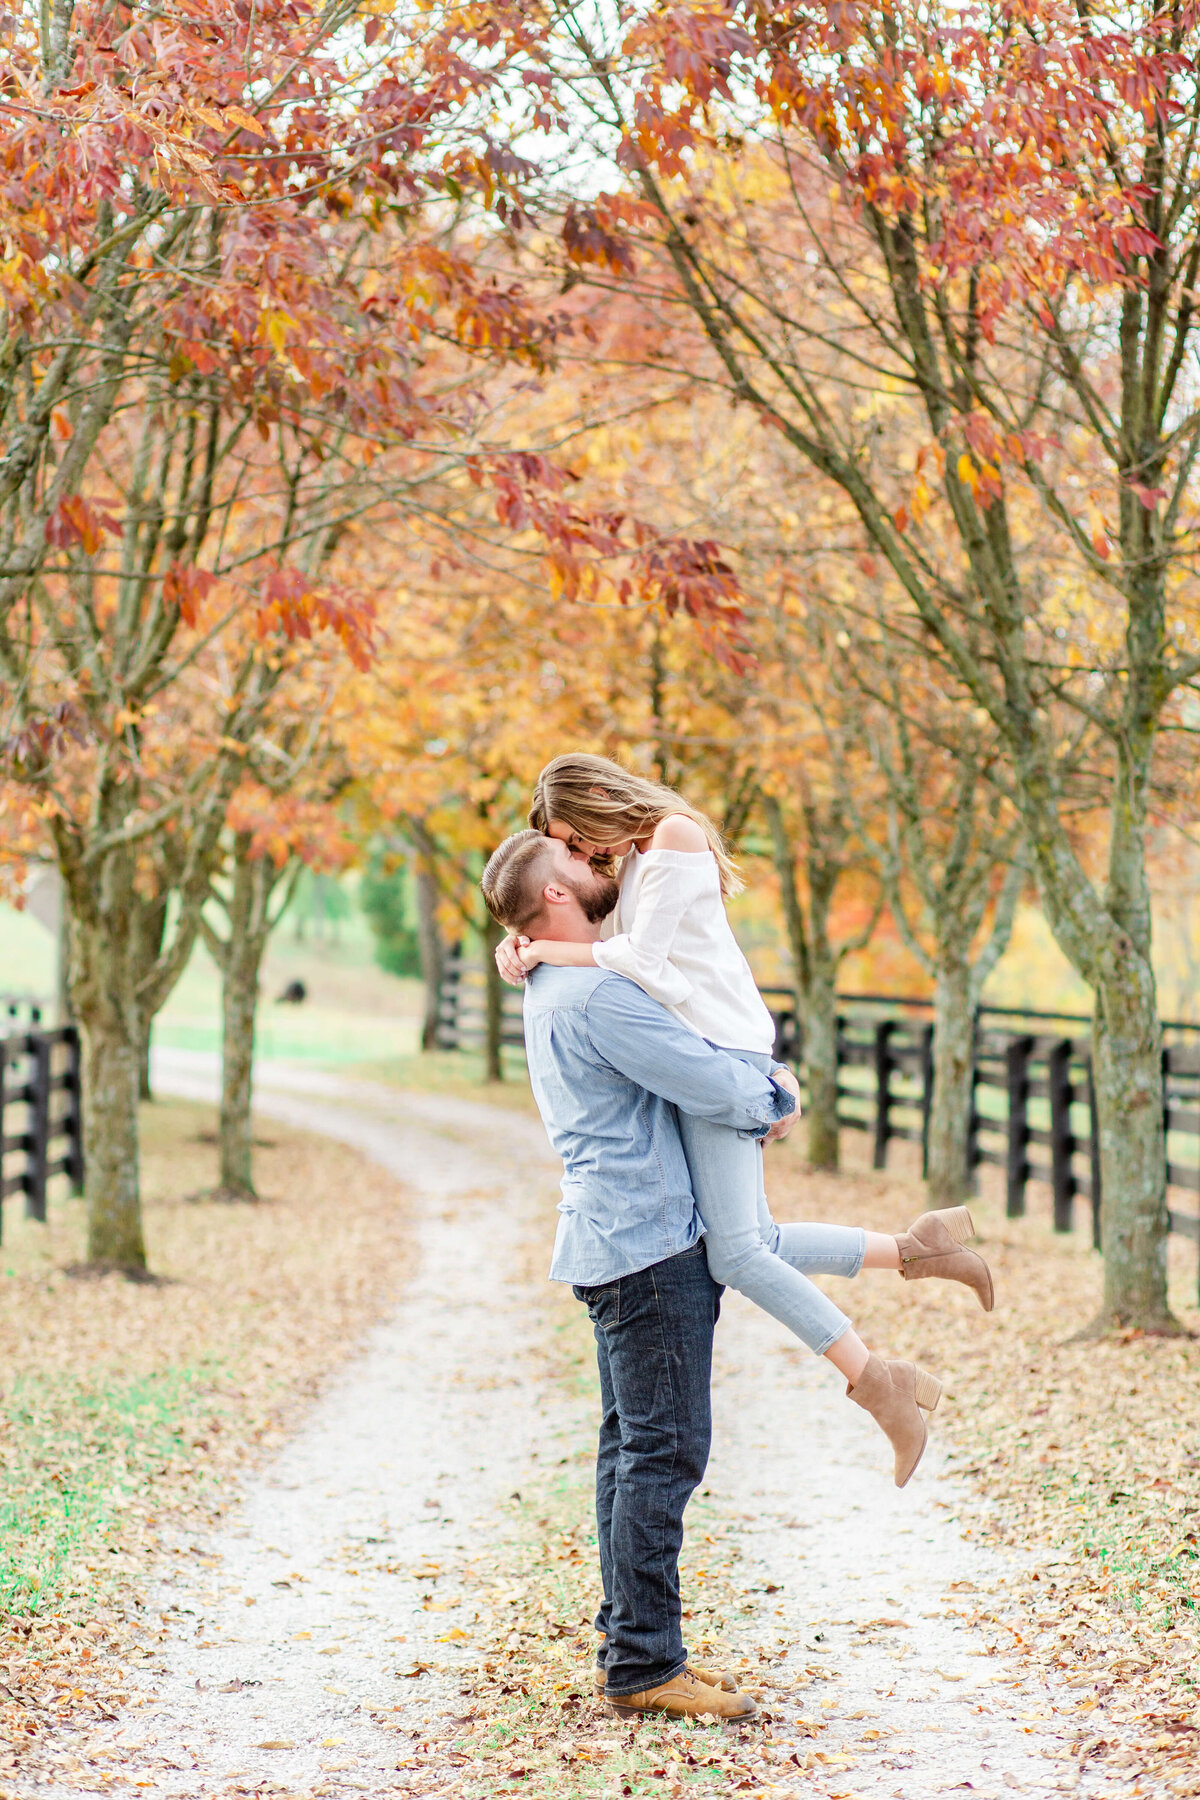 Fall-leaves-engagement-session-light-and-airy-wedding-photographer-Bethany-Lane-1